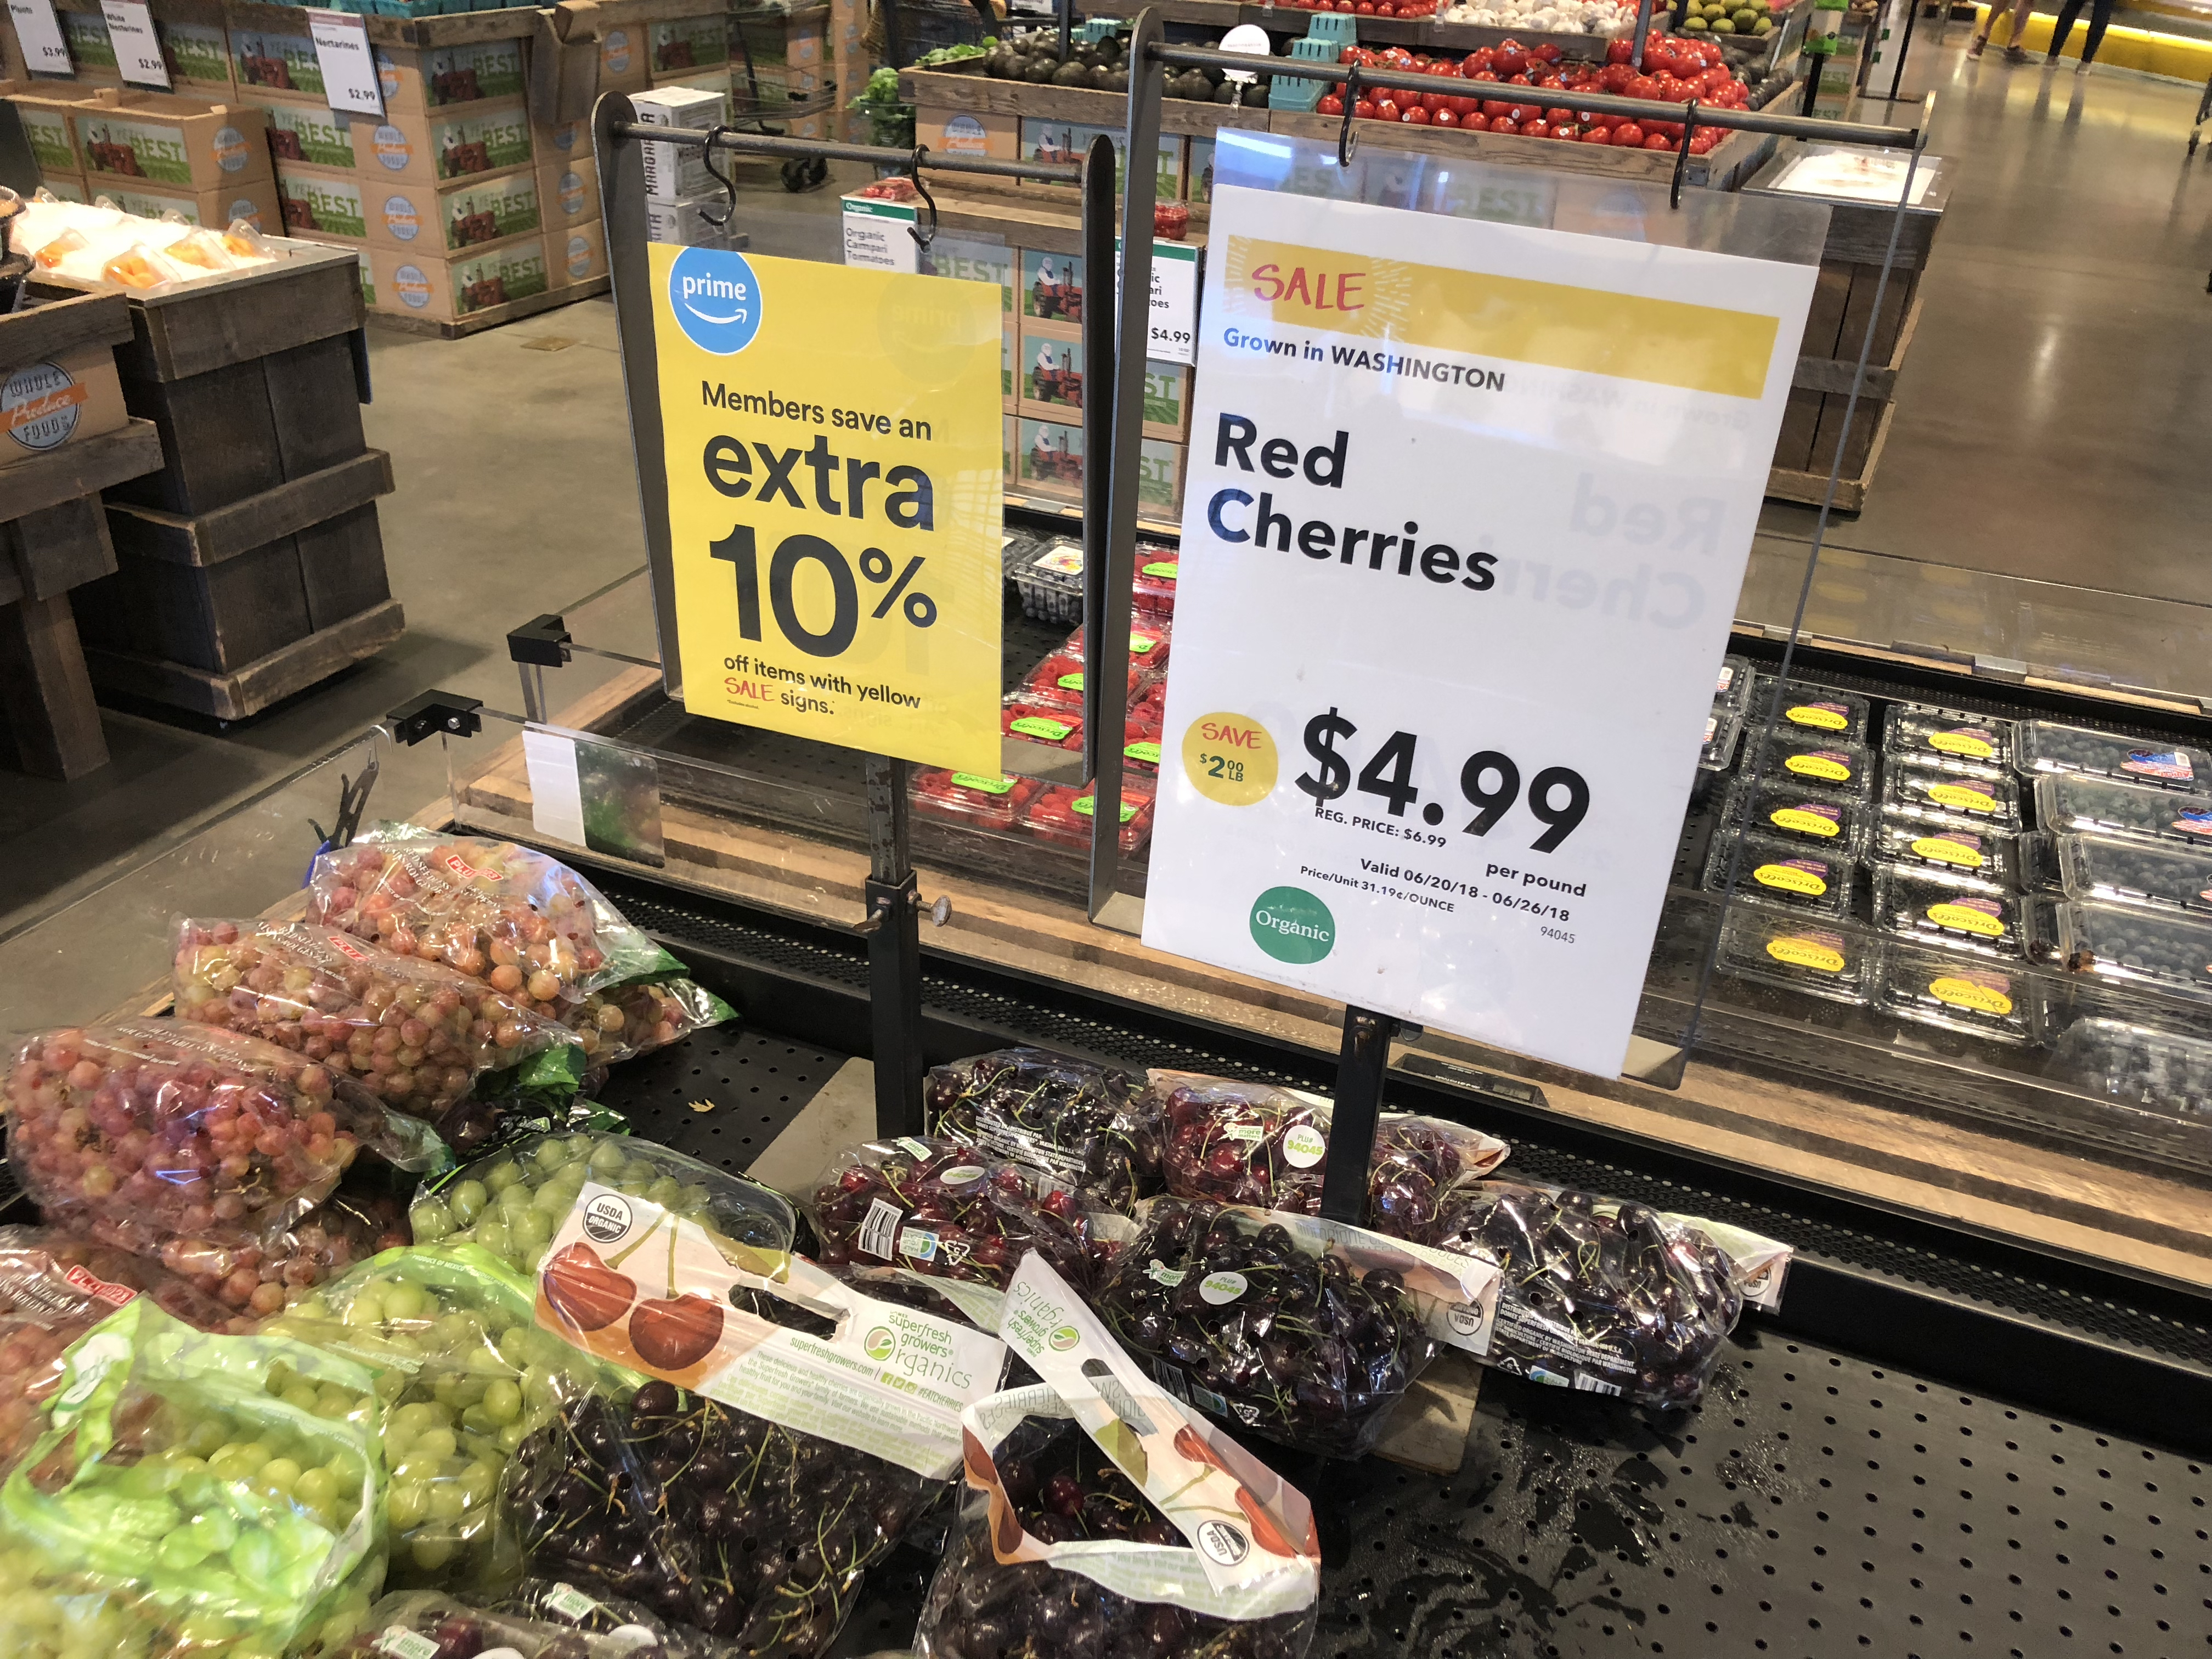 money-saving hacks at Whole Foods Market – yellow labels in produce promise 10% extra savings